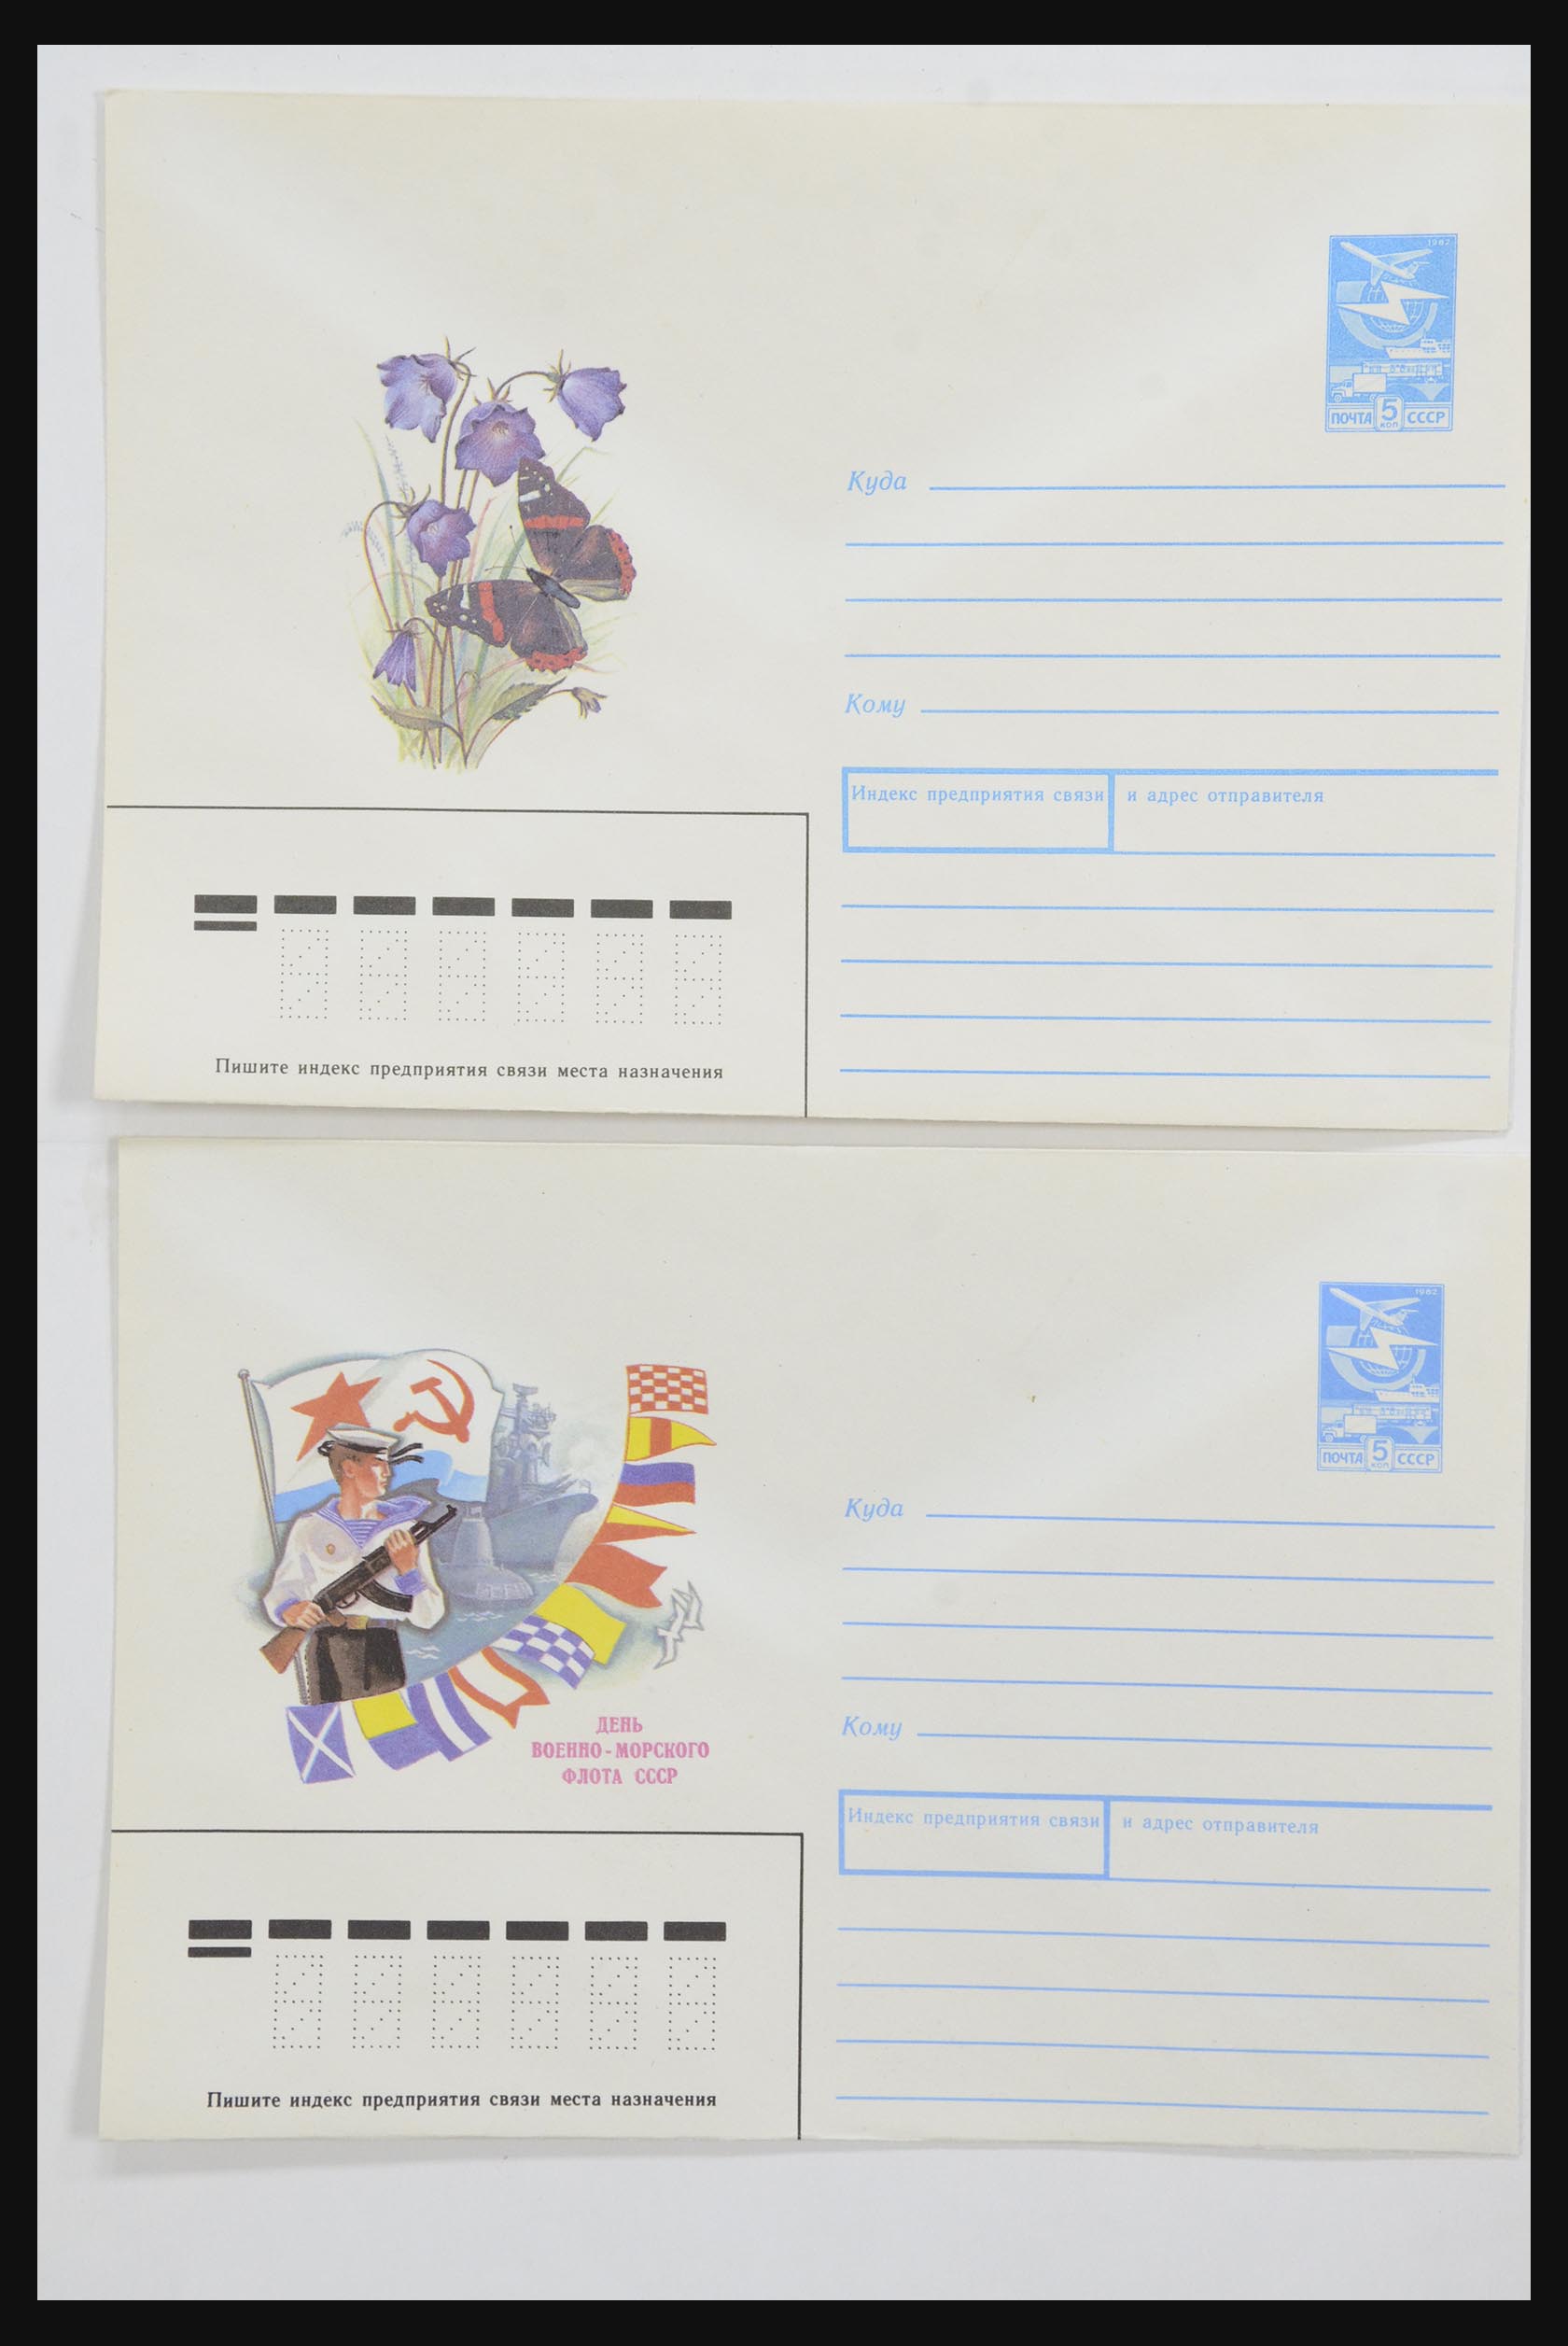 31928 0012 - 31928 Eastern Europe covers 1960's-1990's.